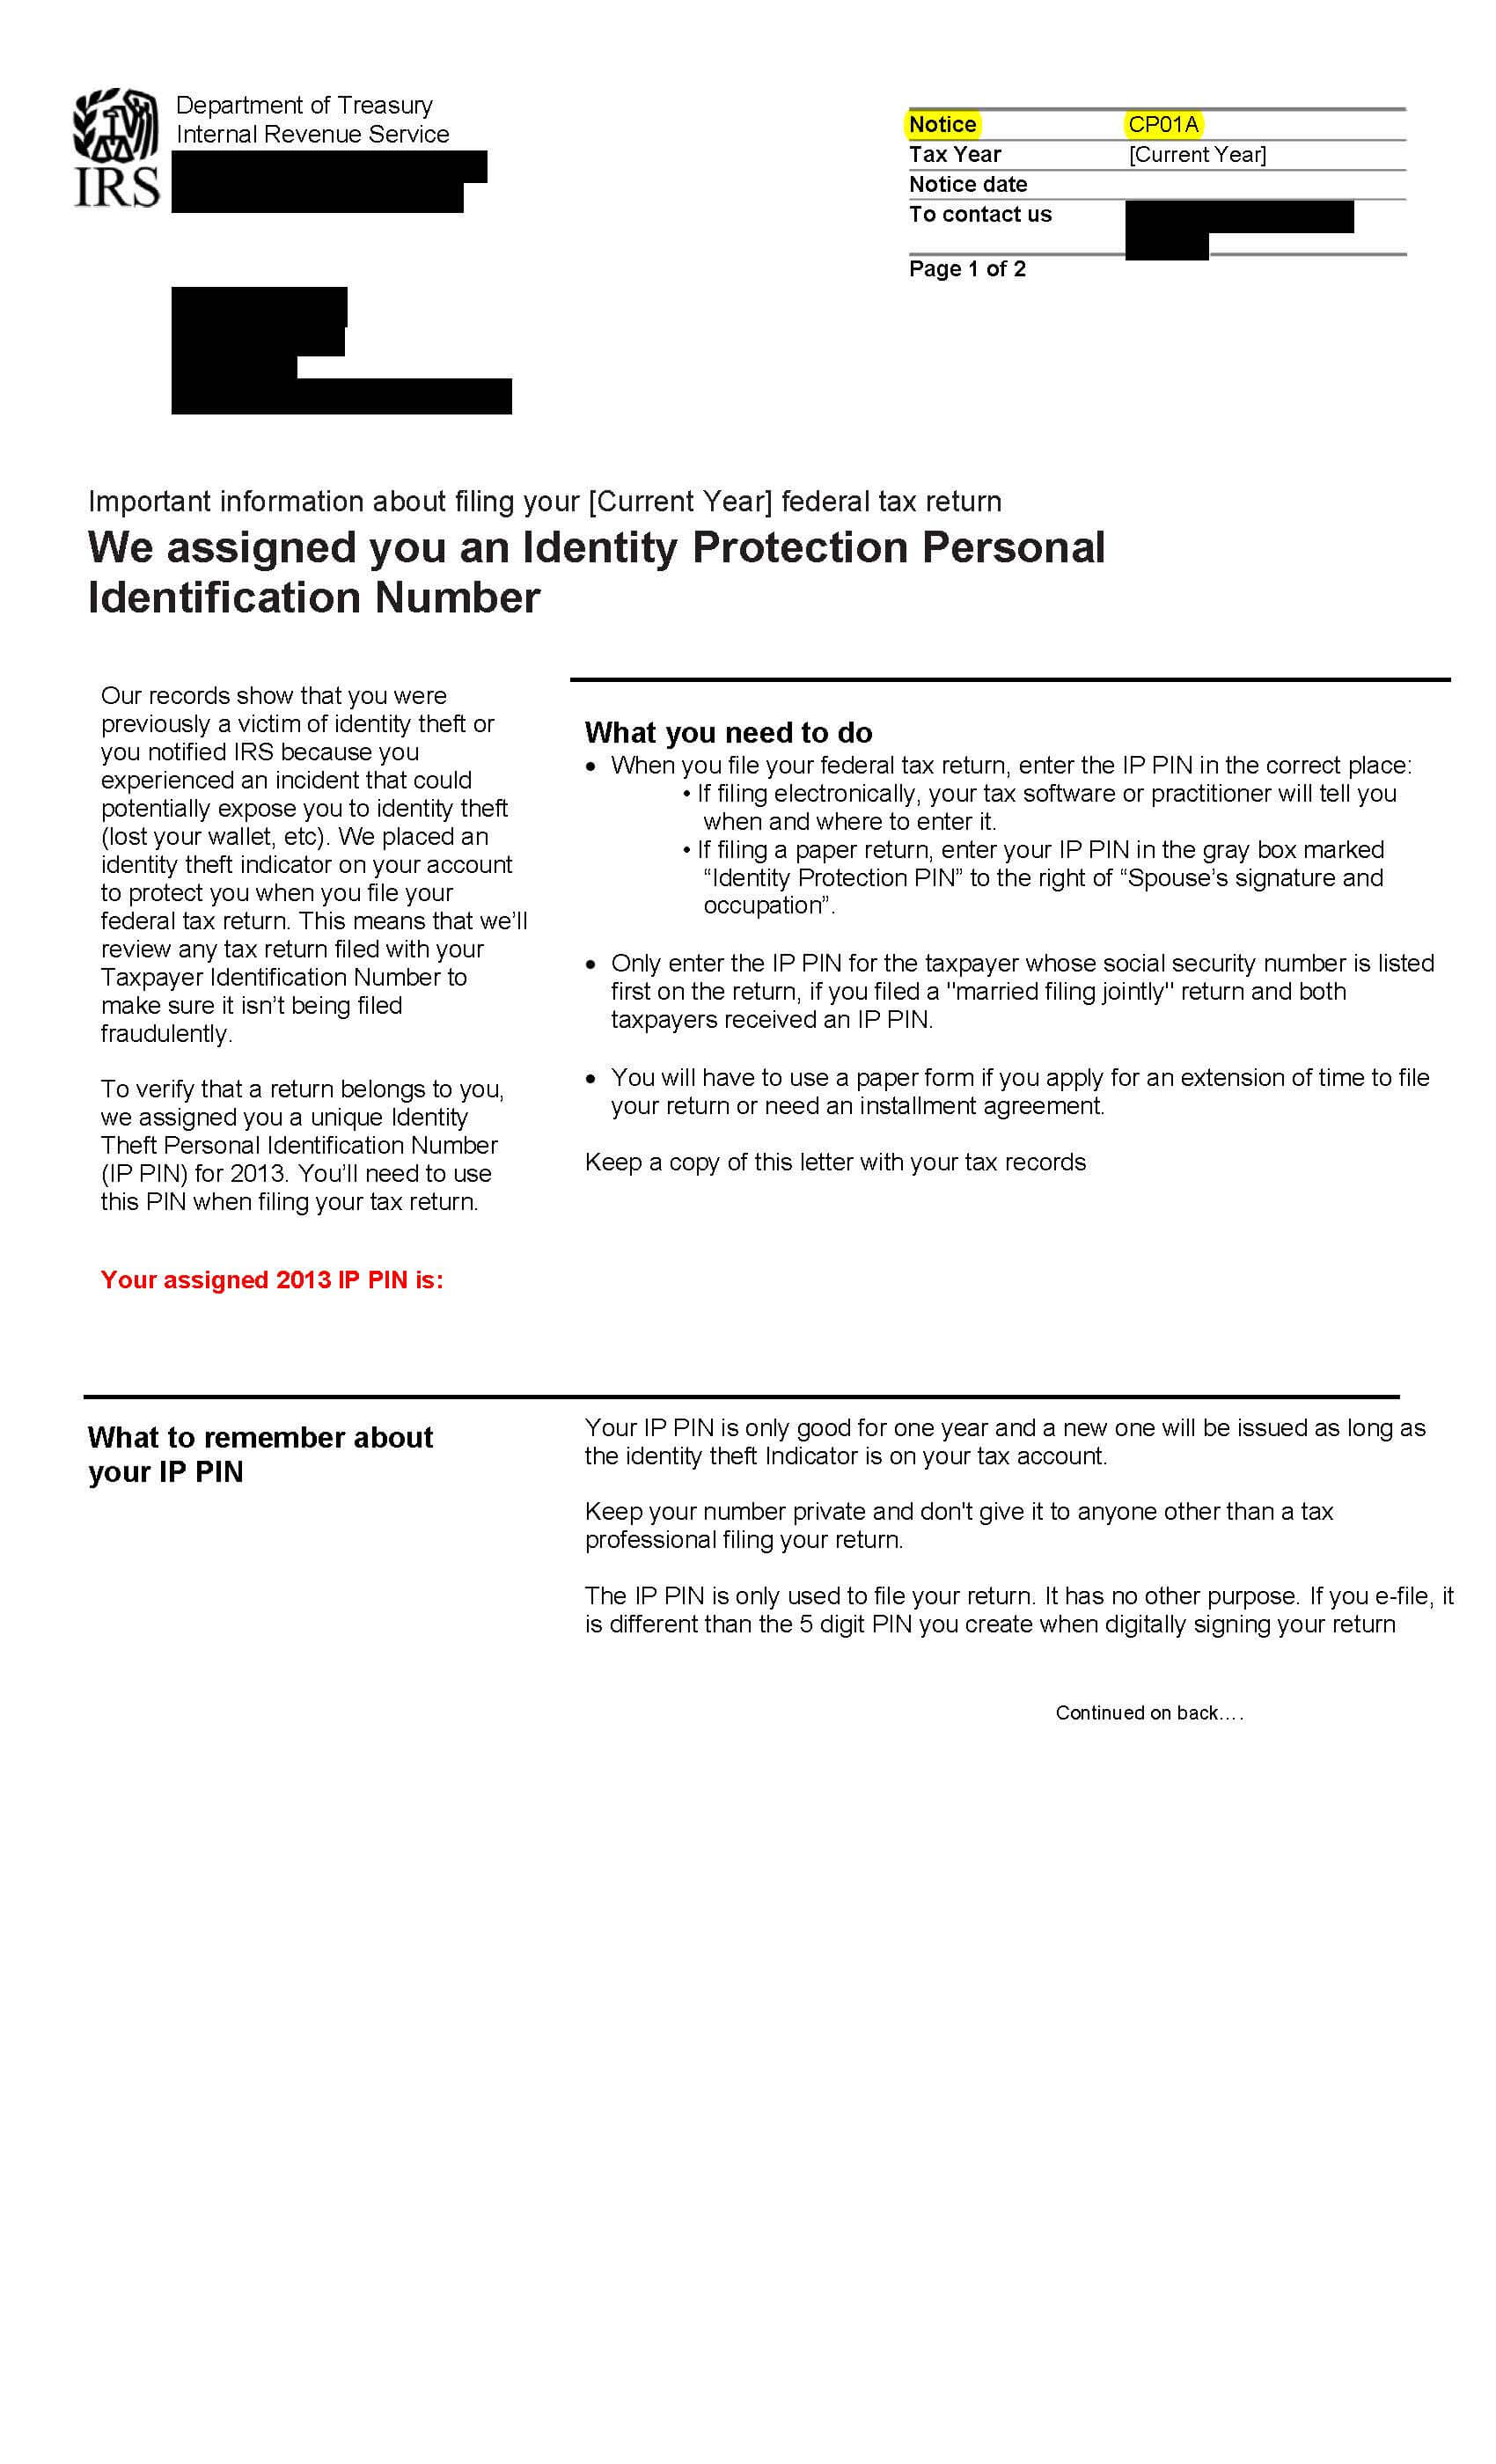 www.irs.gov/cp01a - Notice CP01A gives you an Identity Protection Personal Identification Number